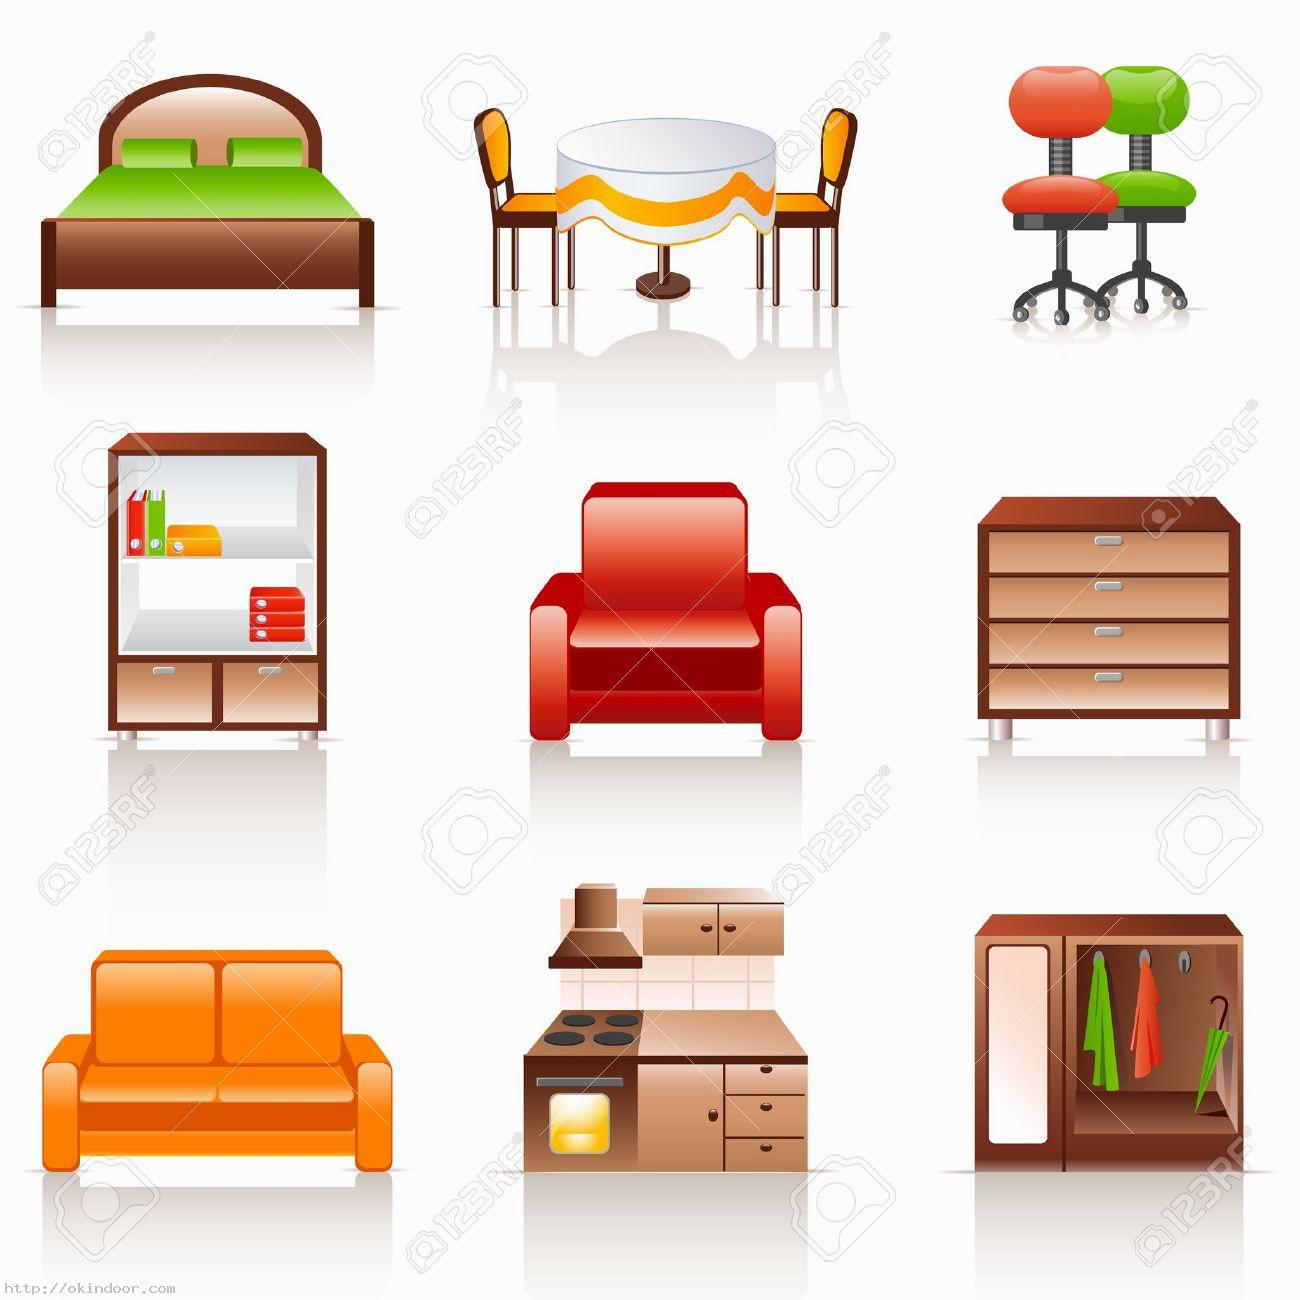 House furniture clipart